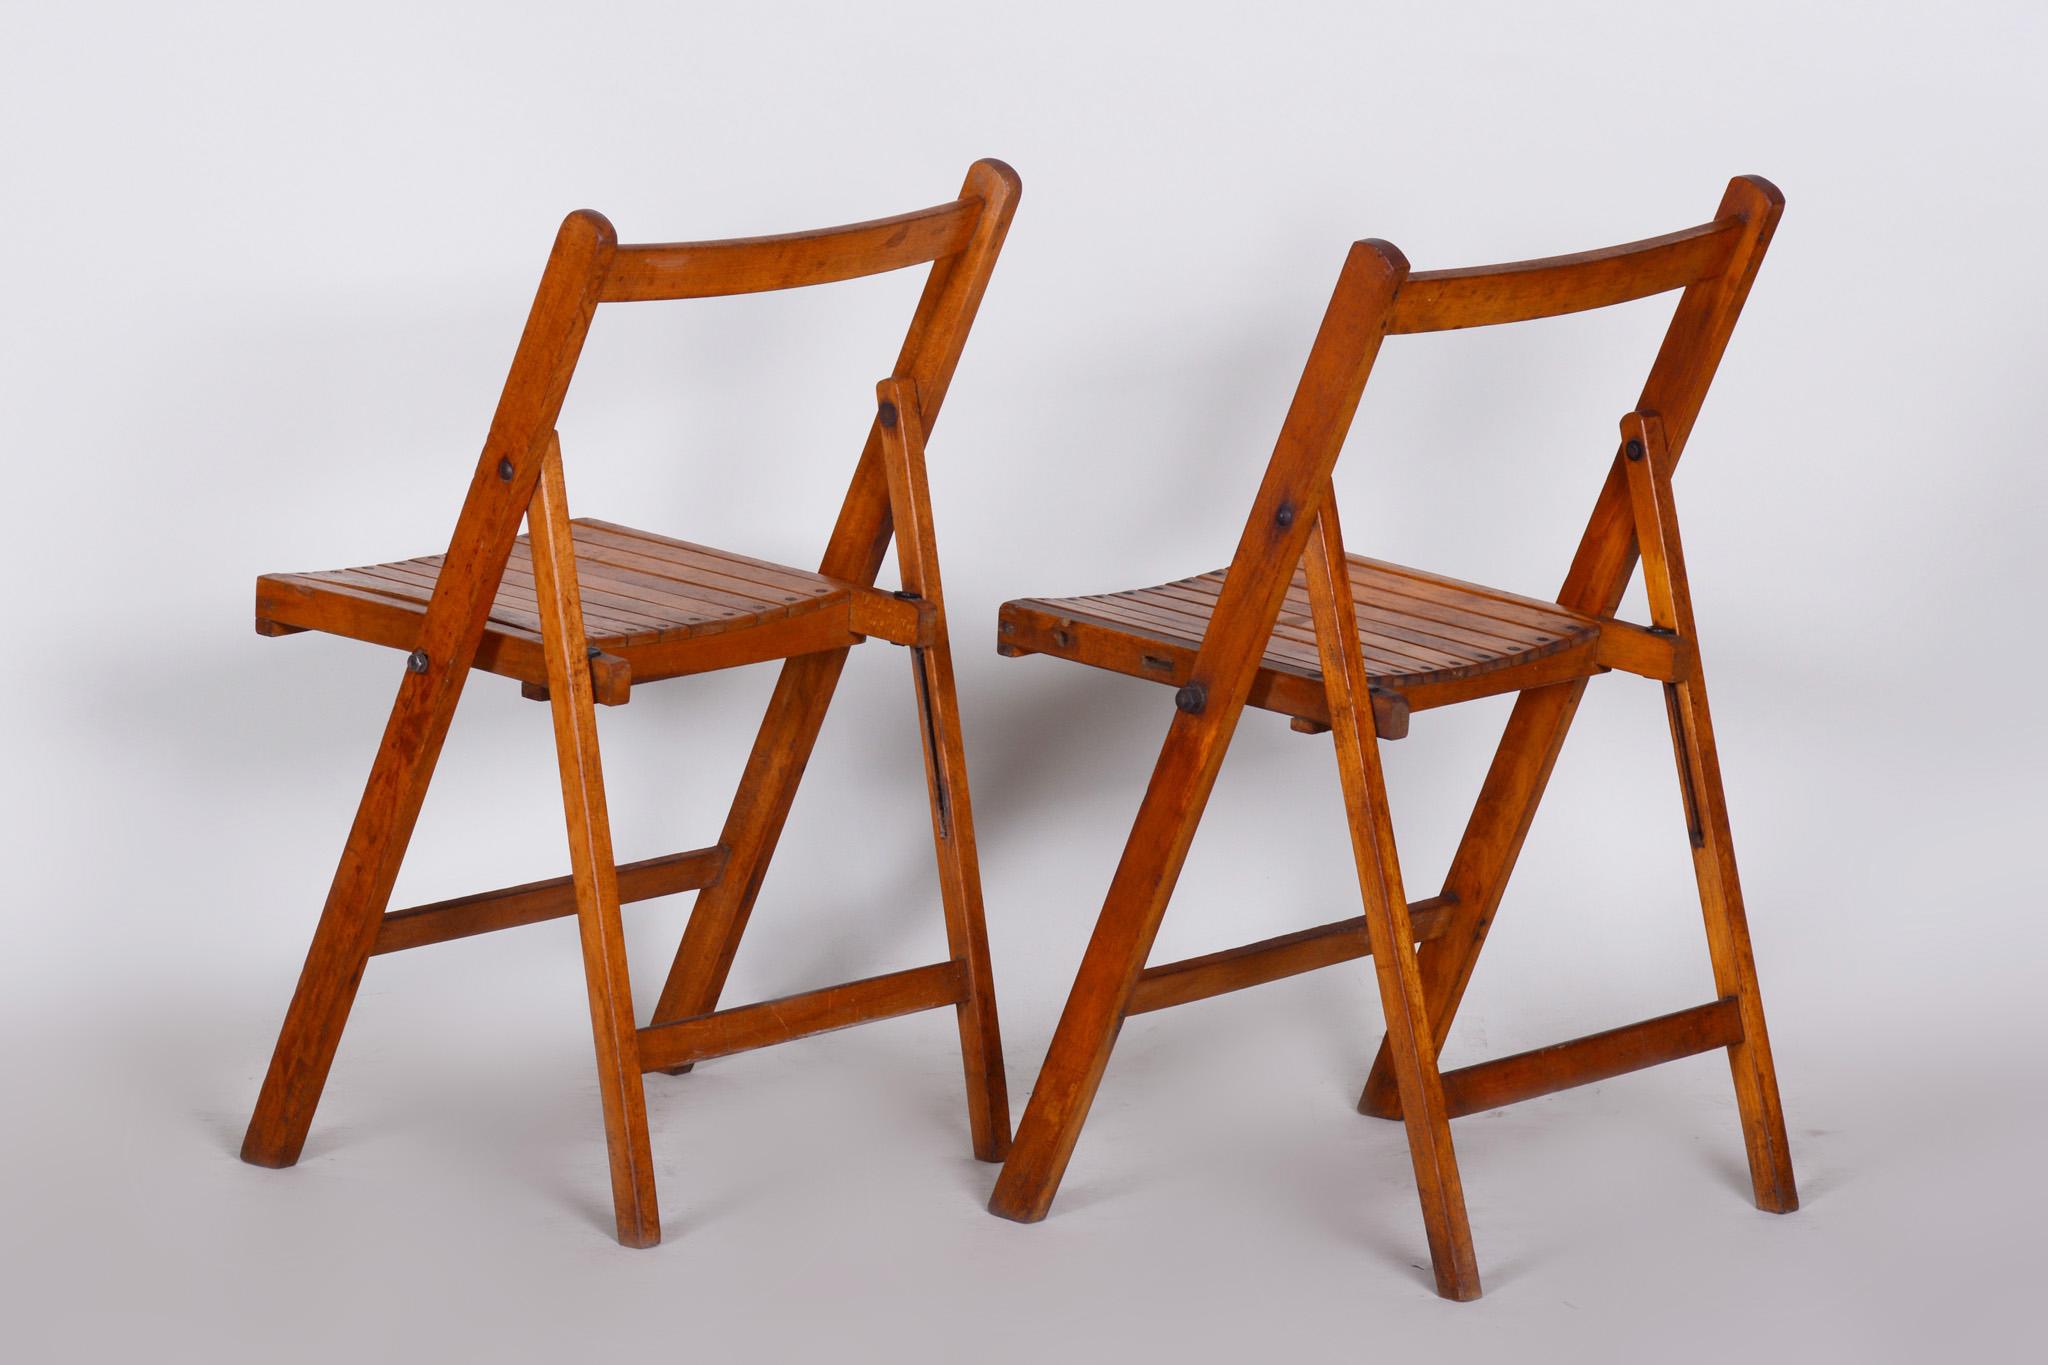 Czech Midcentury Beech Chairs, Original Condition, 1950s, 2 Pieces In Good Condition For Sale In Horomerice, CZ